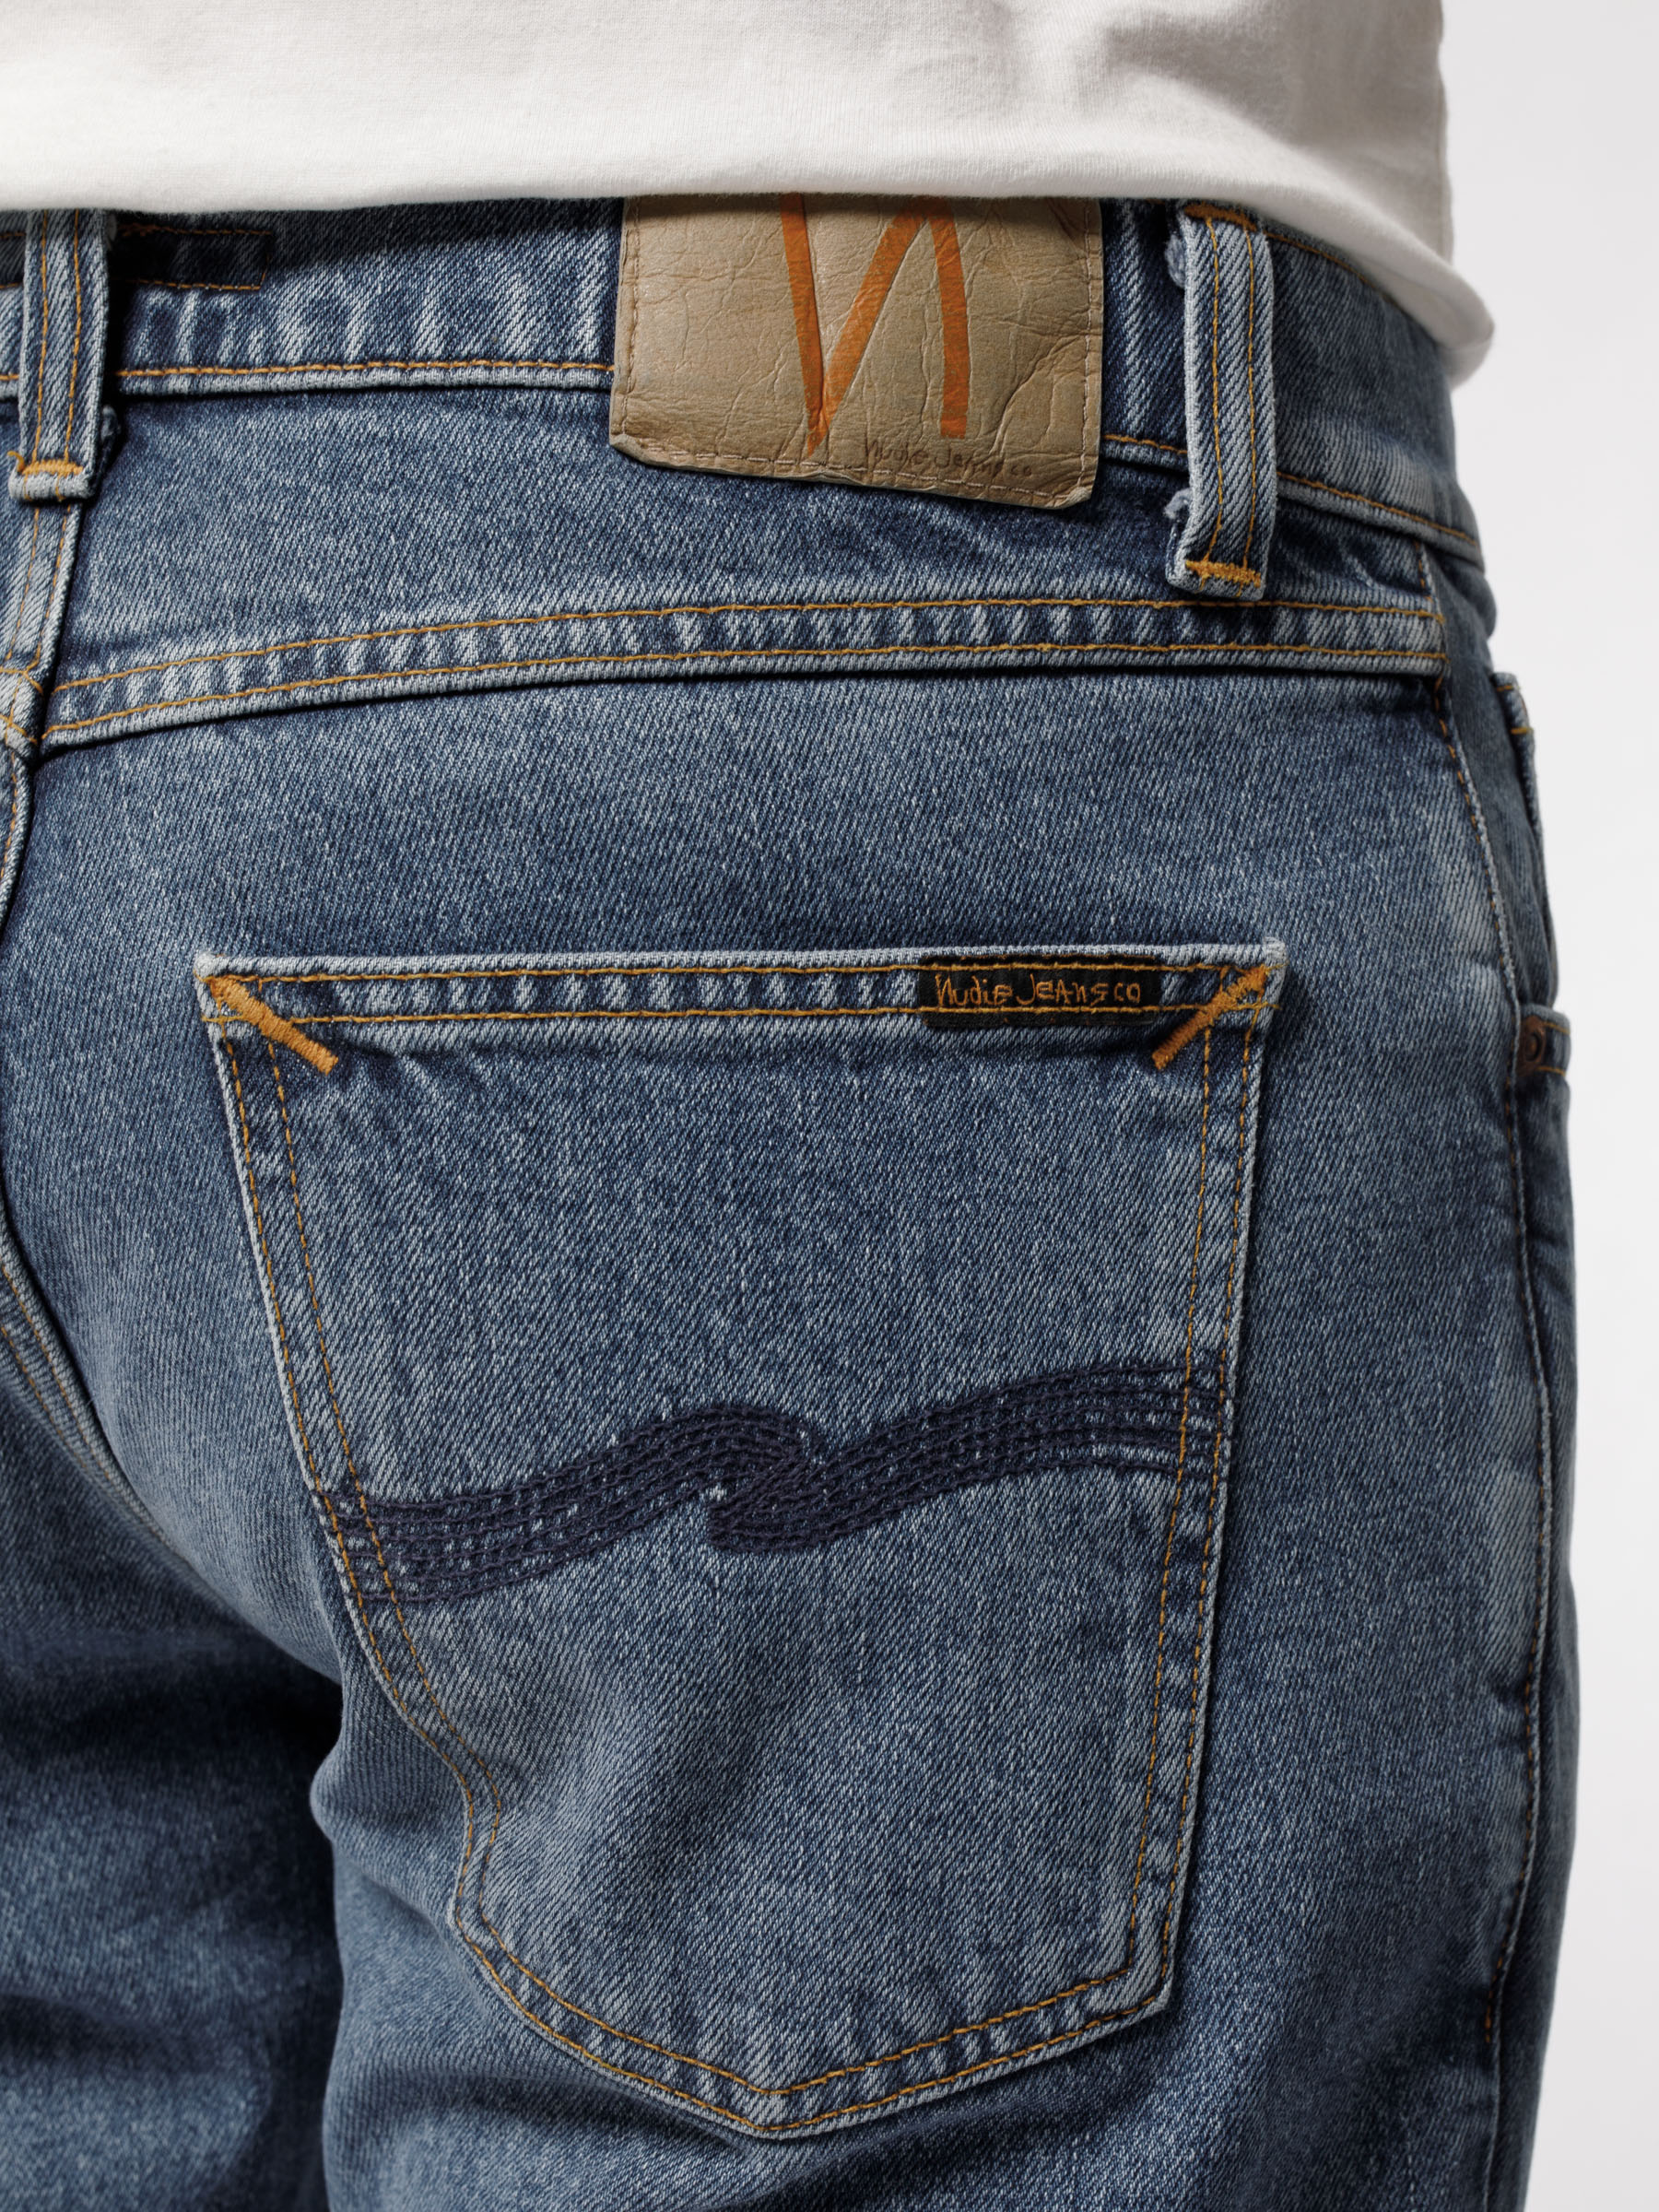 Nudie Jeans - GRITTY JACKSON - Old Gold